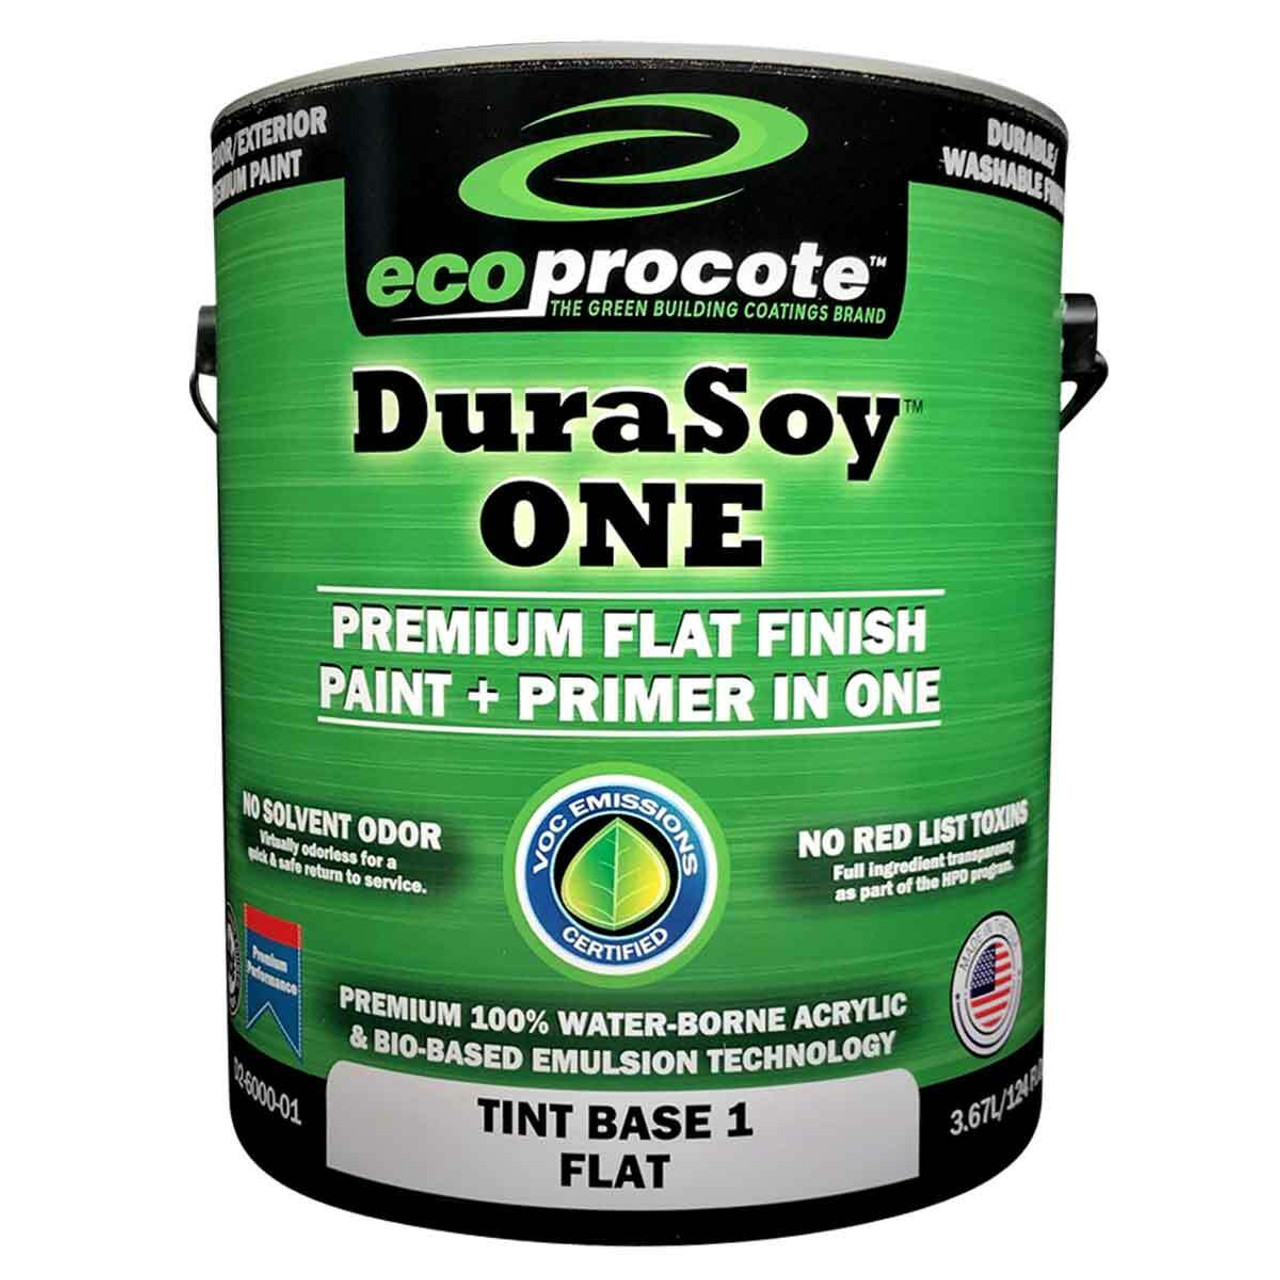 DuraSoy ONE Paint+Primer, Flat, PreTint, 1 Gal - Eco Safety Products